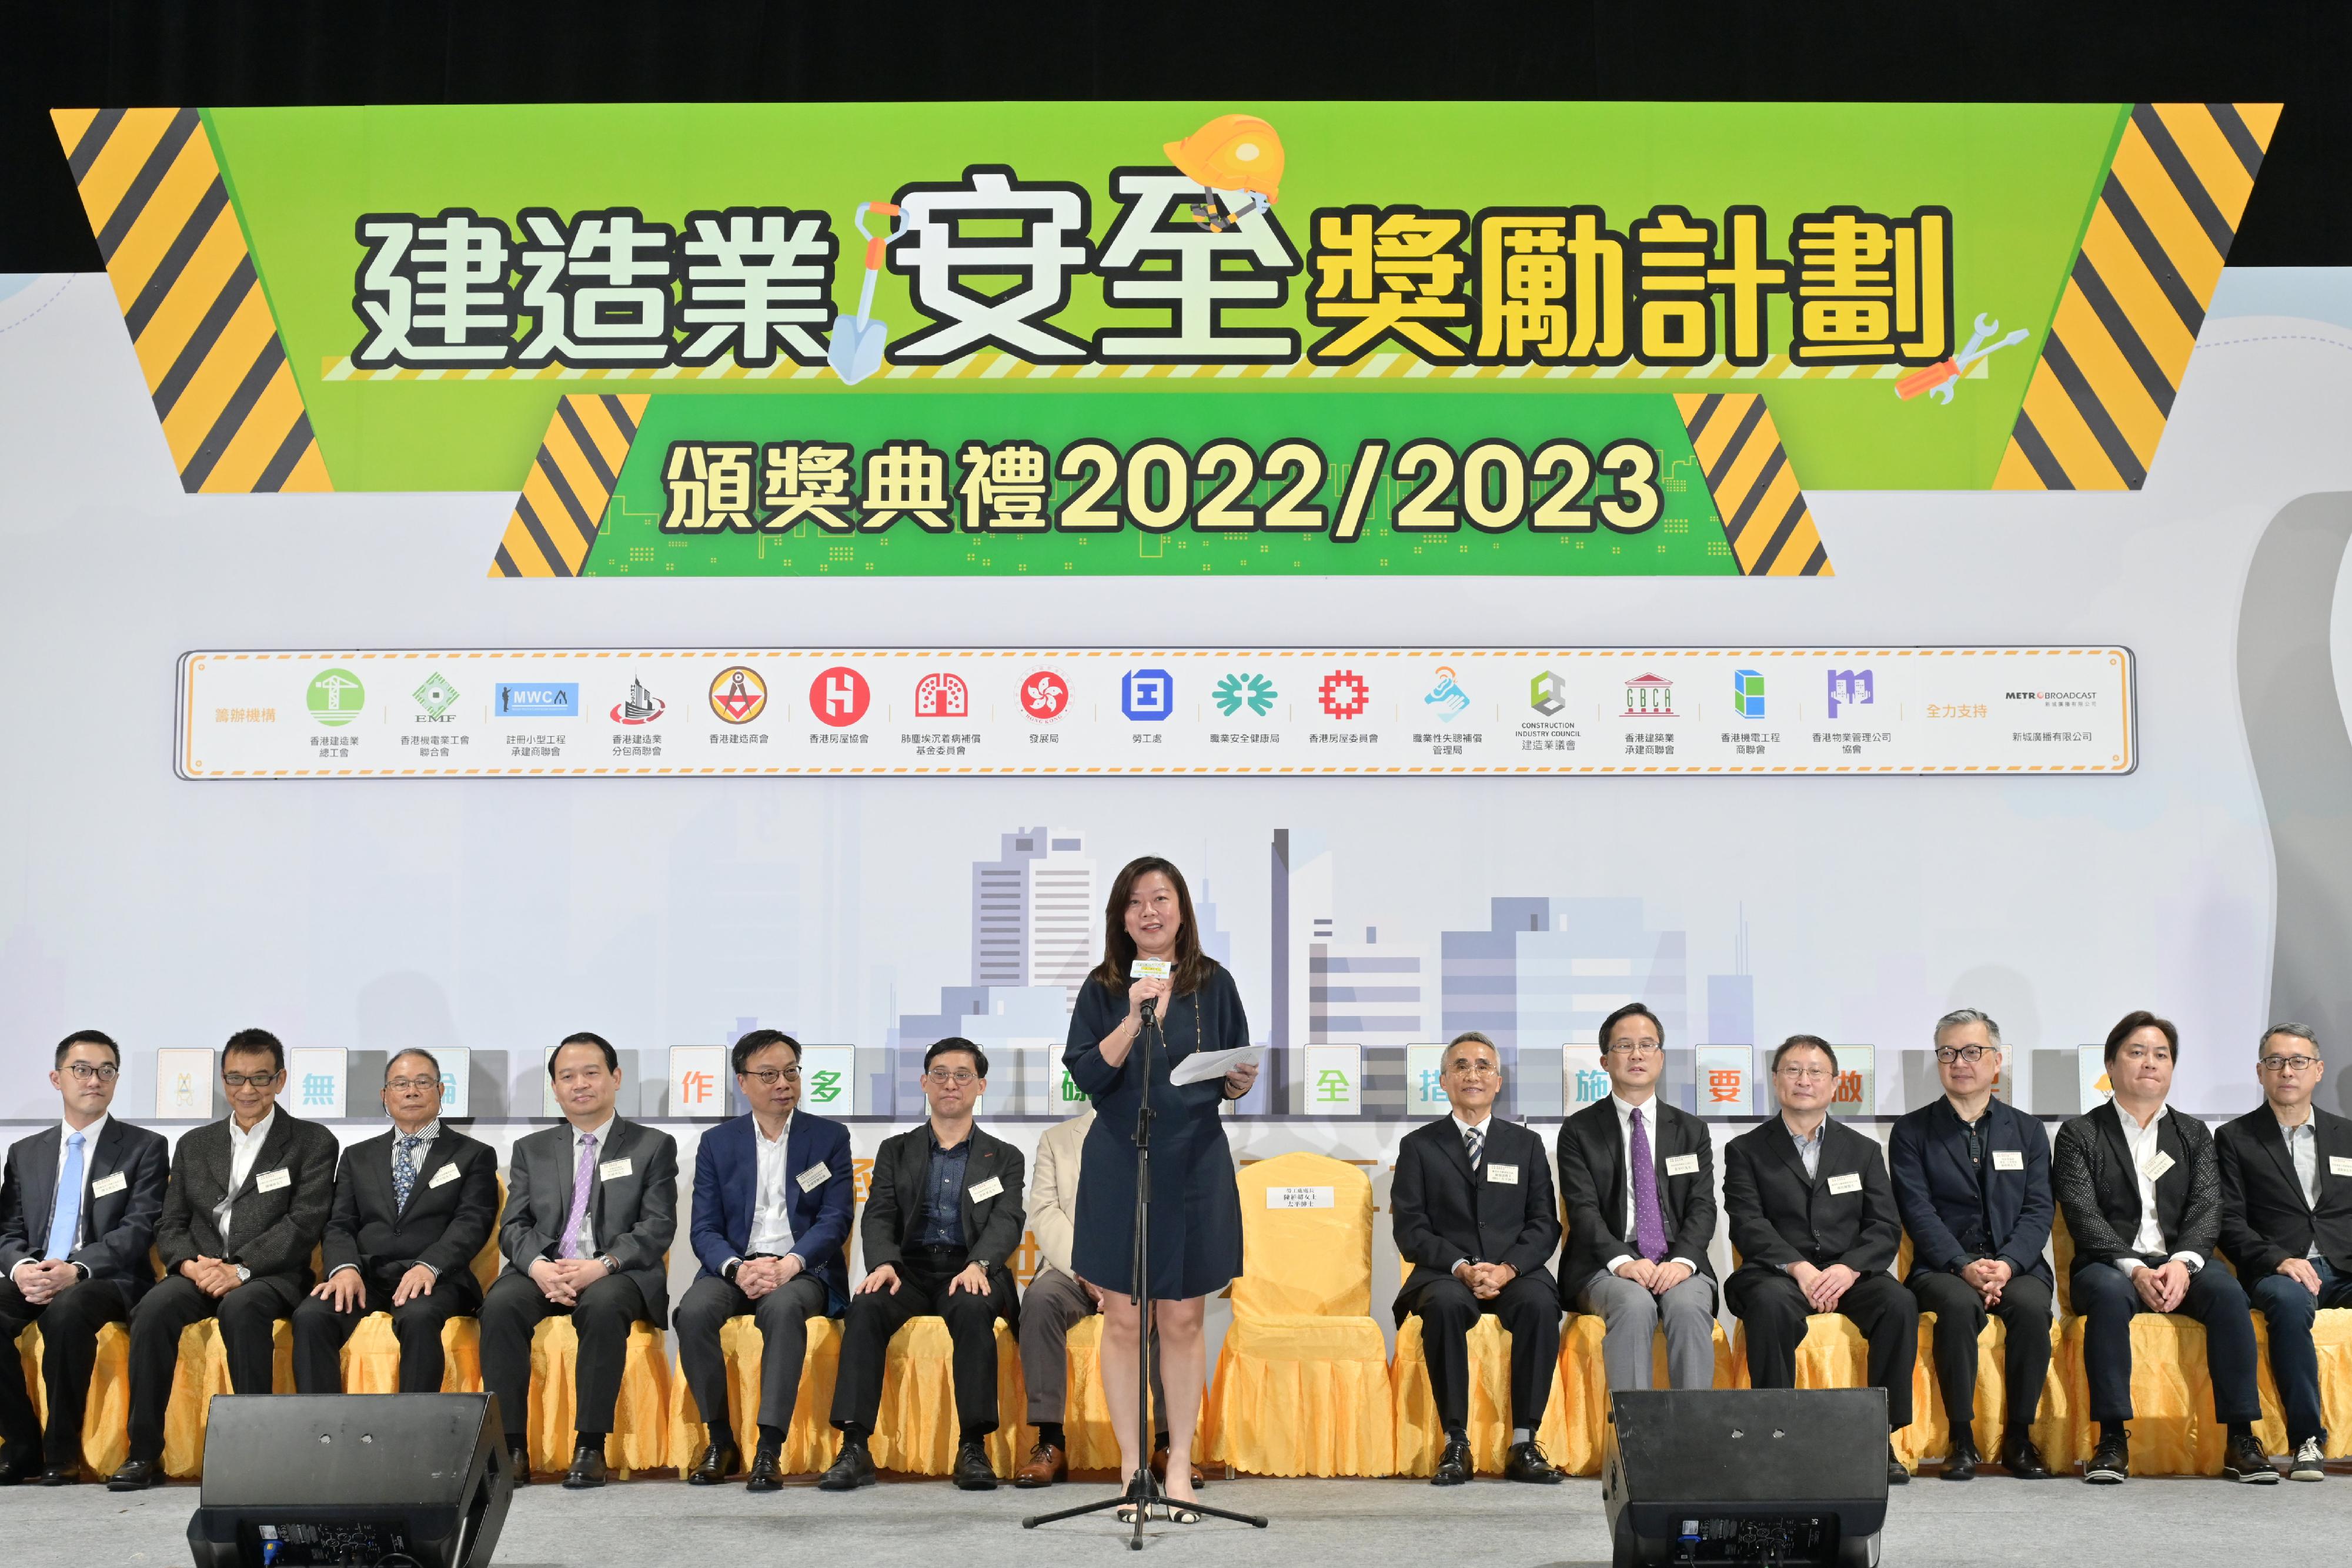 The Award Presentation Ceremony of the Construction Industry Safety Award Scheme was held at MacPherson Stadium in Mong Kok today (March 26). The Commissioner for Labour, Ms May Chan, said in a speech at the ceremony that the Labour Department will continue to step up inspections and enforcement at construction sites, strengthen publicity and promotion as well as education and training so as to foster a culture of occupational safety and health in a proactive manner.